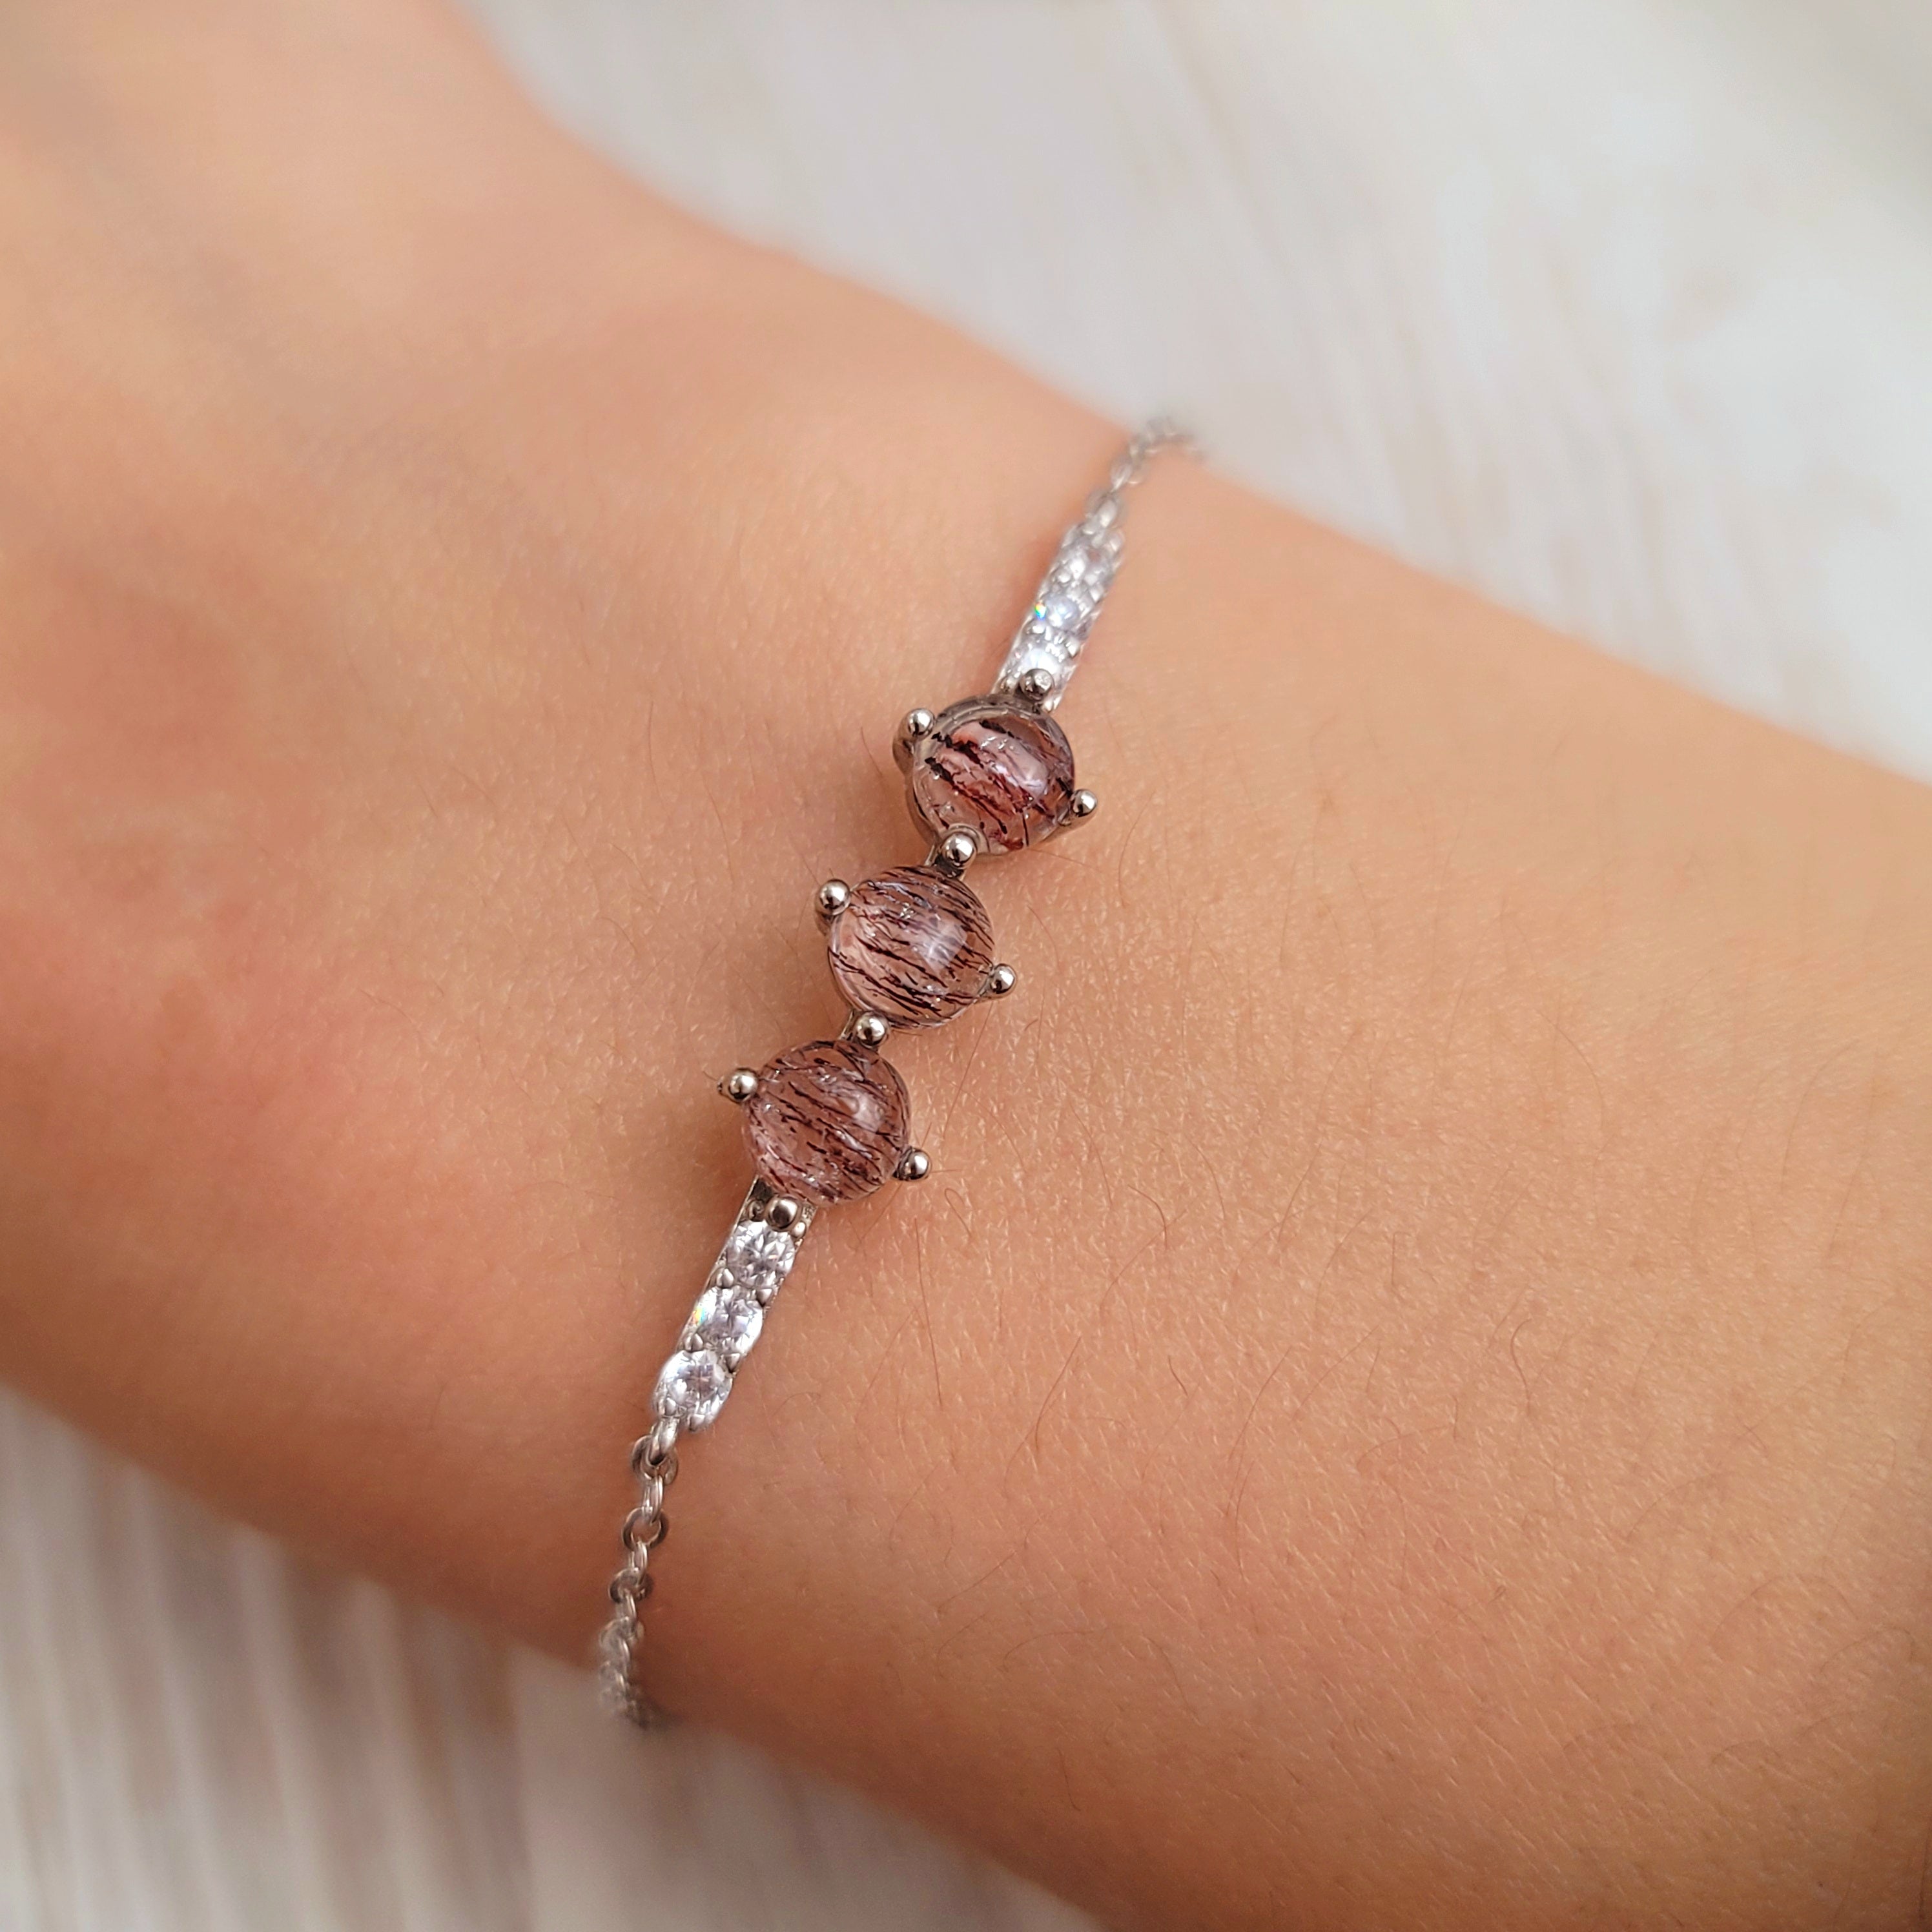 Super 7 Bracelet .925 Silver for Creating Your Dream Life and Intuition